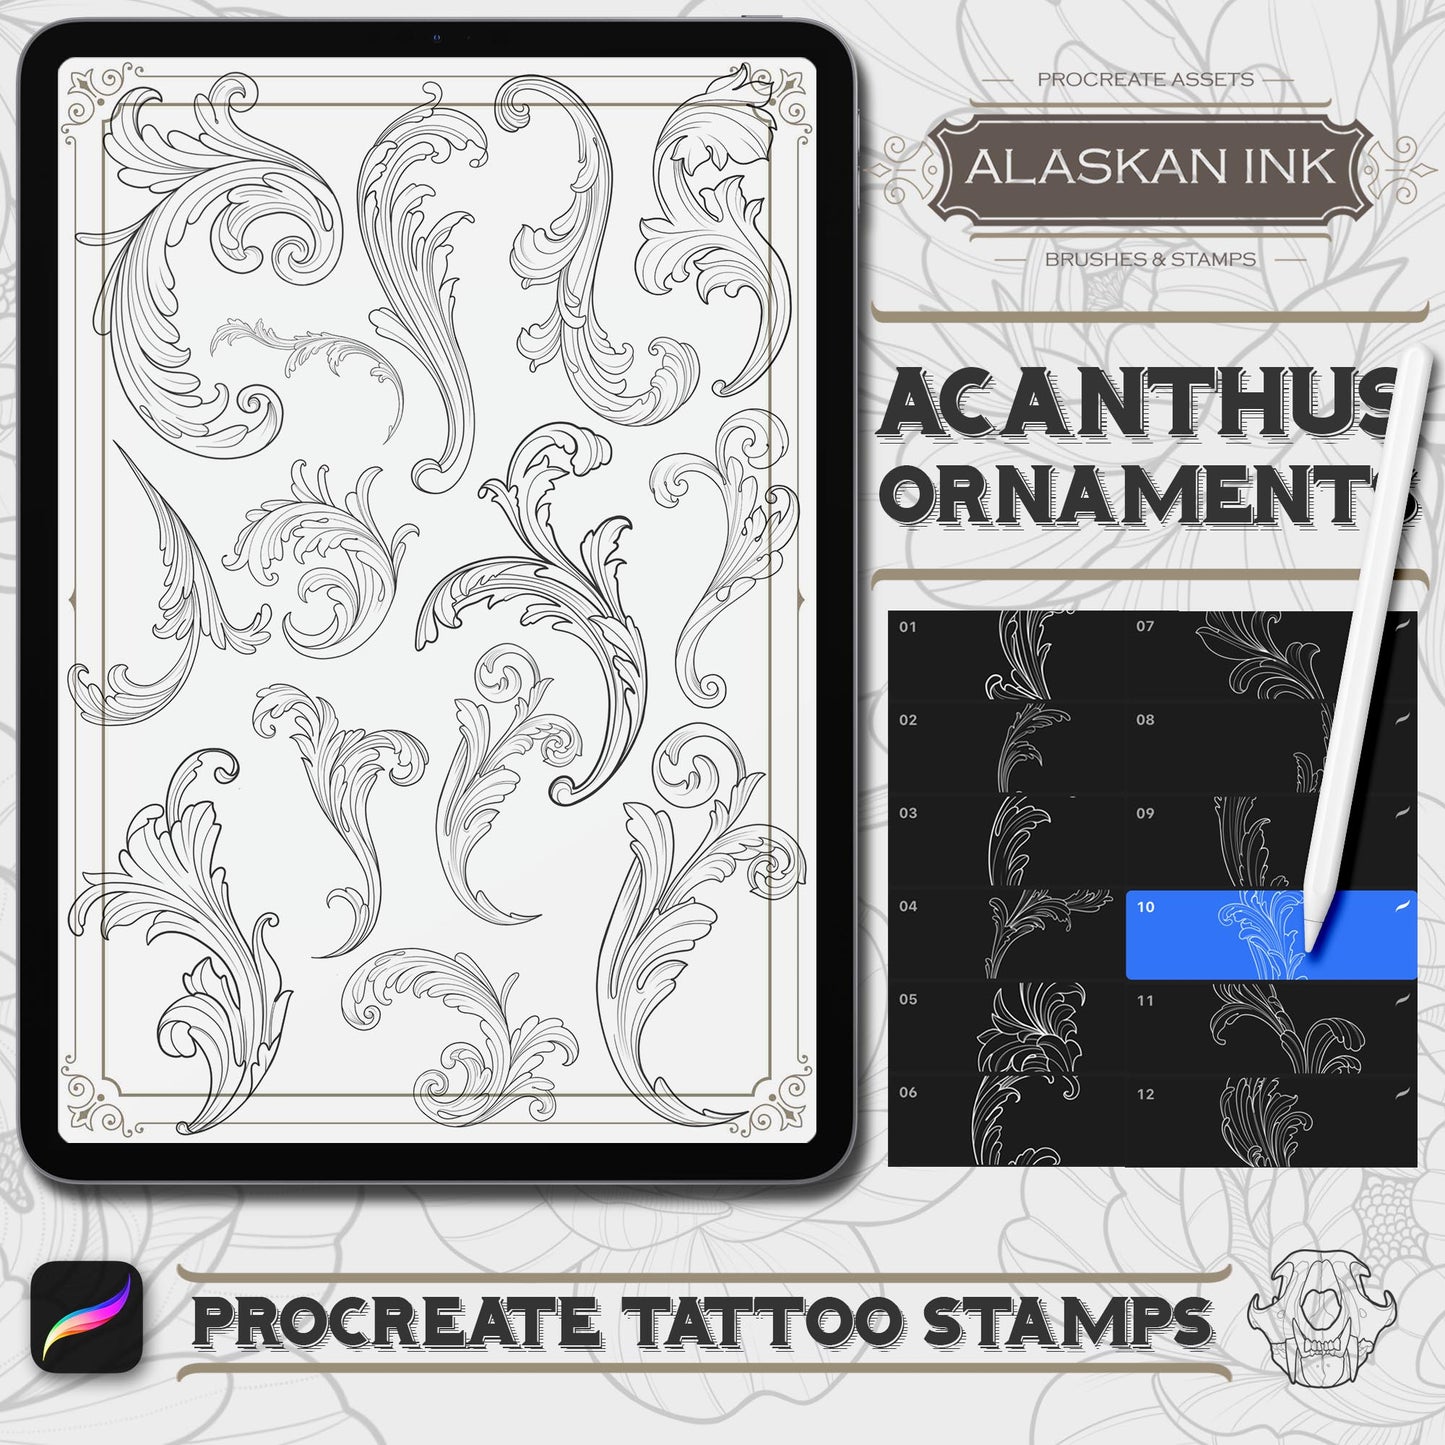 50 Acanthus Ornament Procreate Tattoo Brushes for your iPad created by Alaskan ink studio